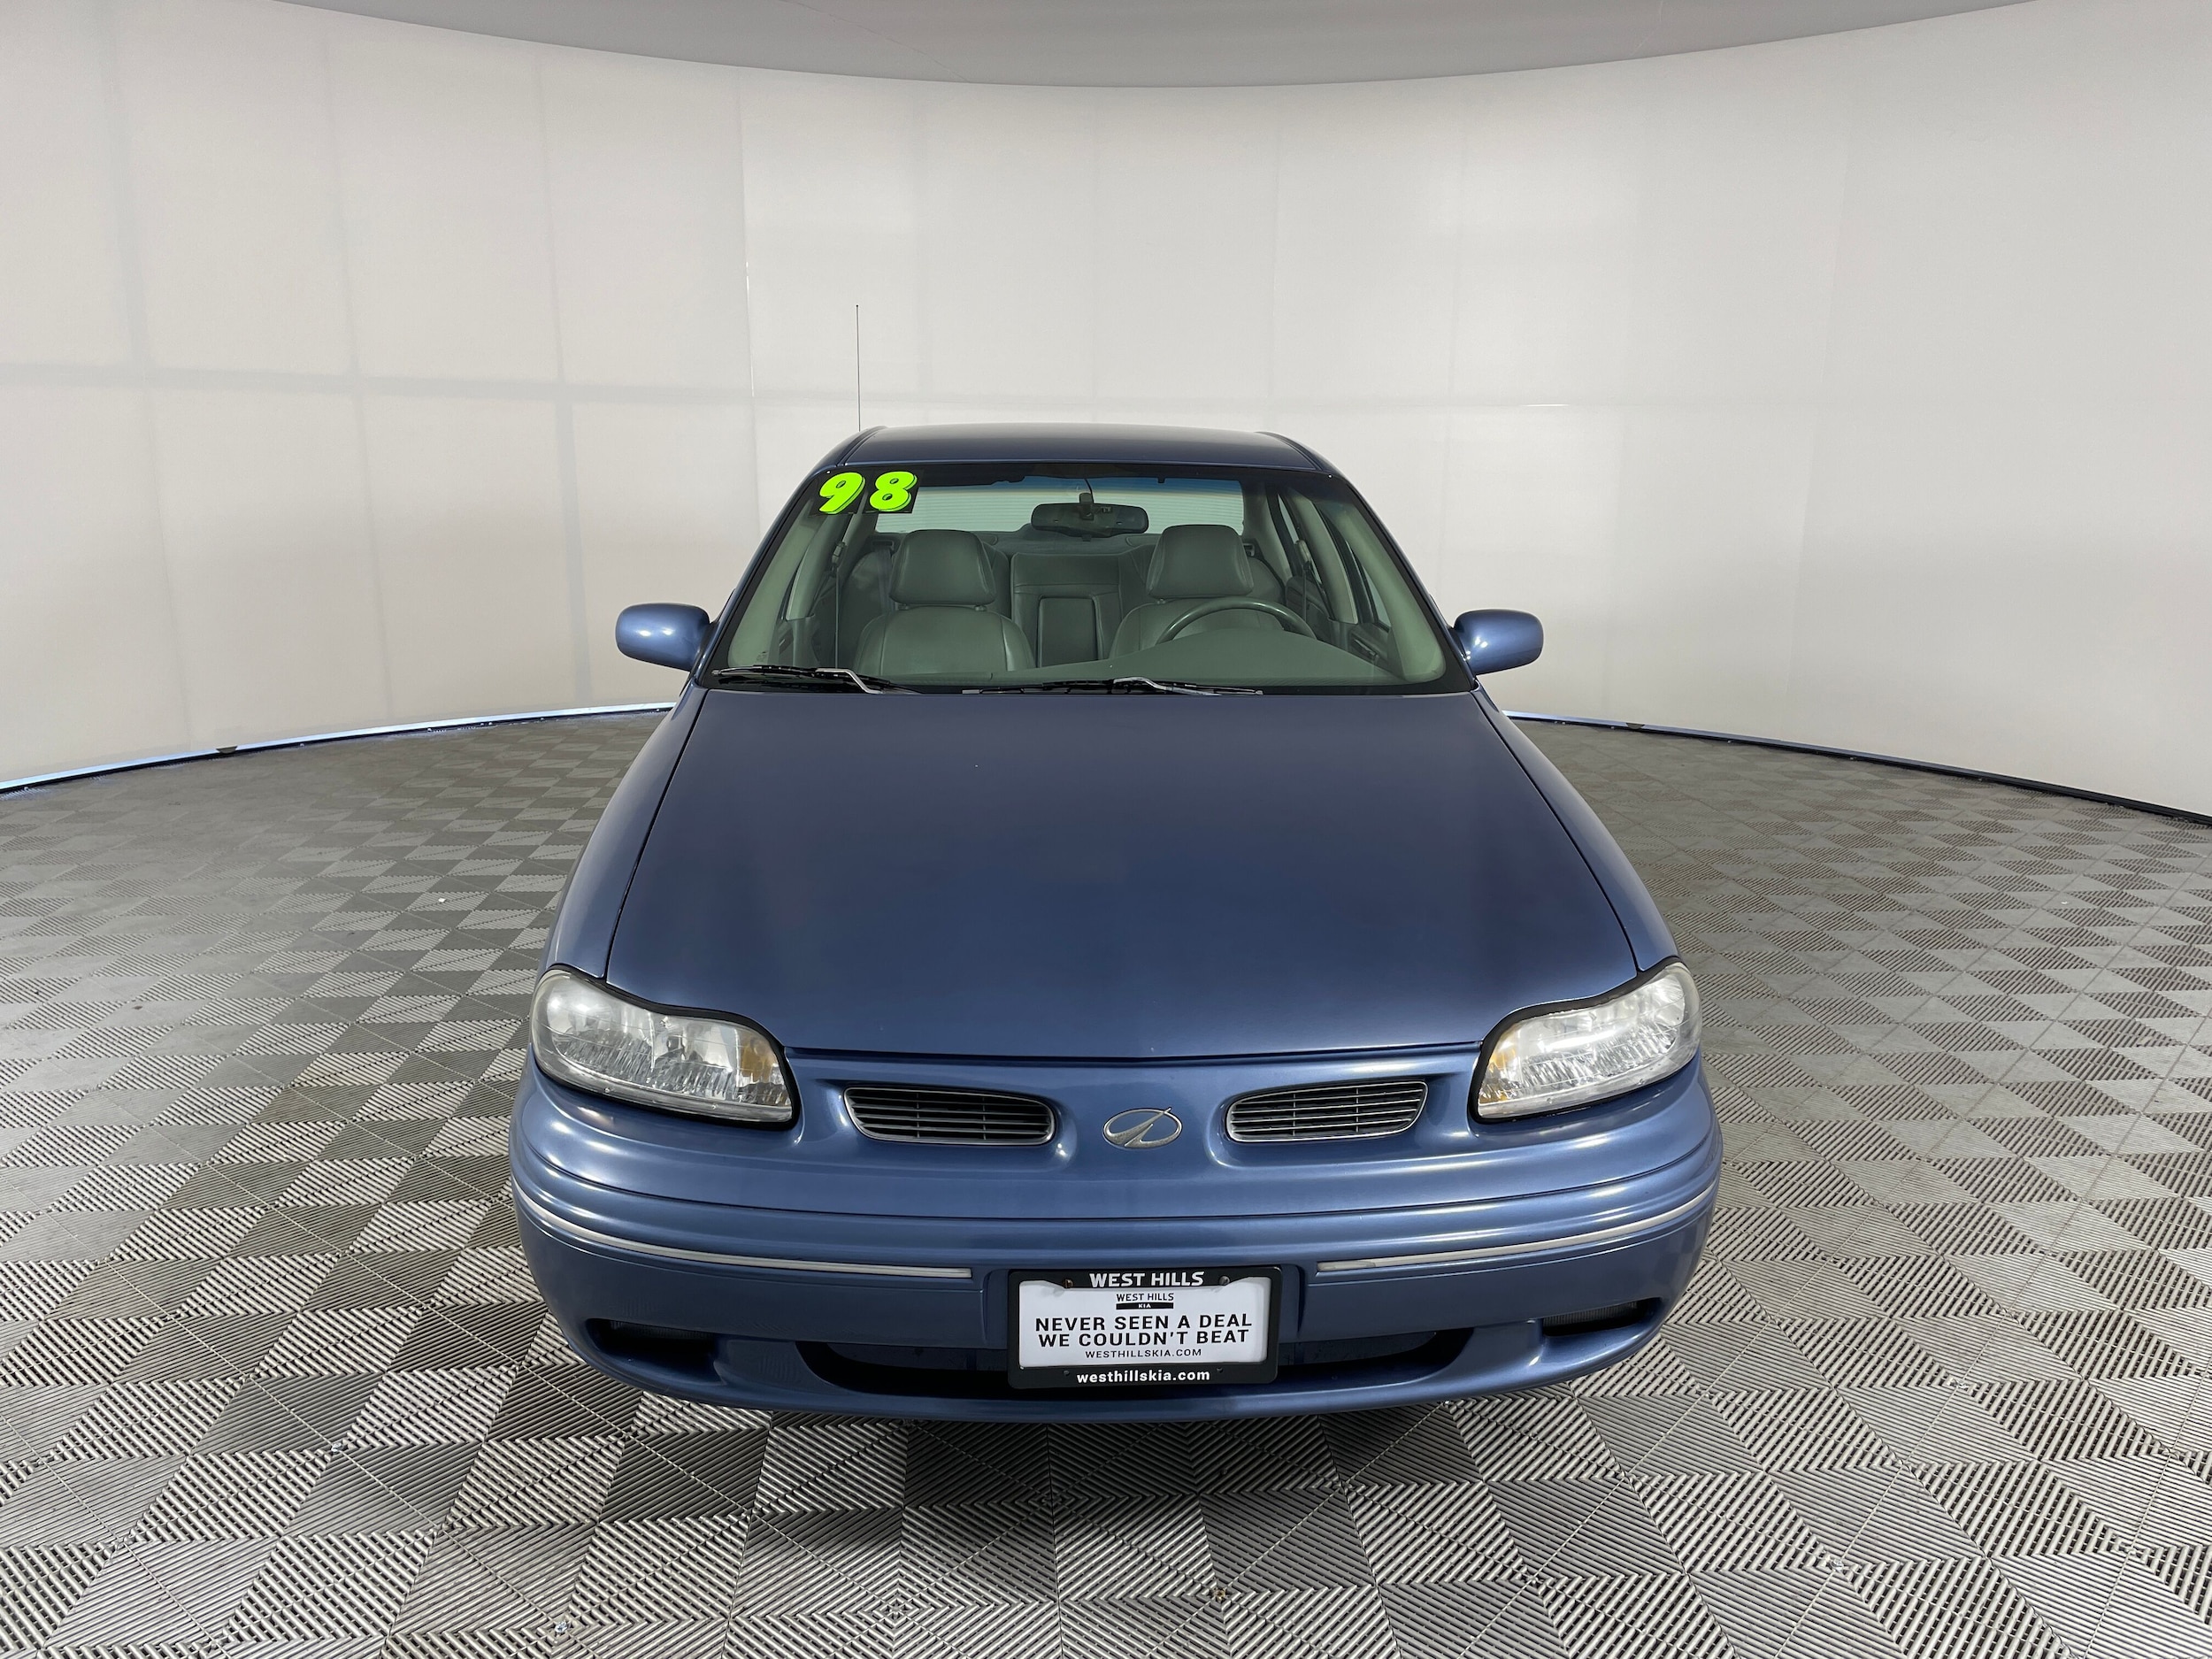 Used 1998 Oldsmobile Cutlass GLS with VIN 1G3NG52M0W6316325 for sale in Bremerton, WA